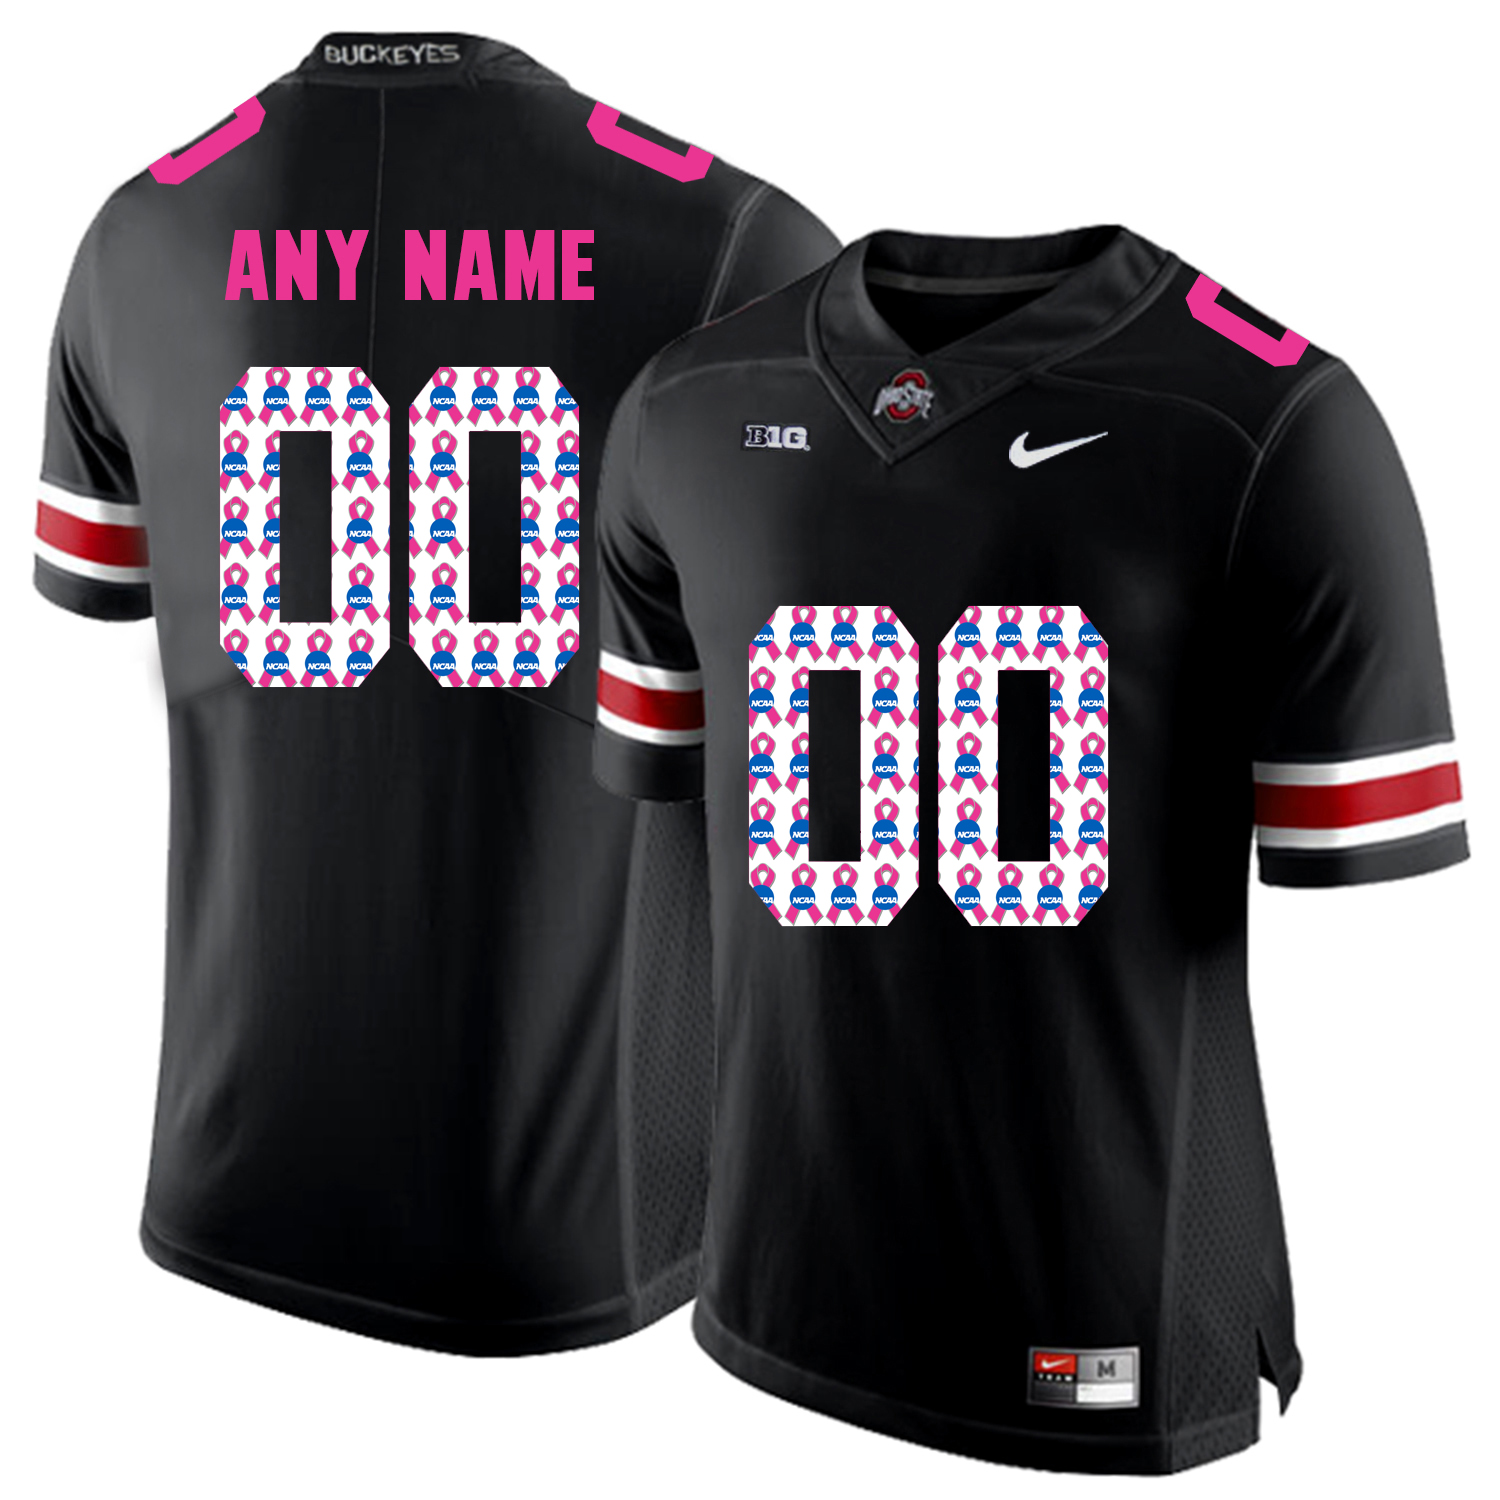 Ohio State Buckeyes Black Shadow Men's Customized 2018 Breast Cancer Awareness College Football Jersey